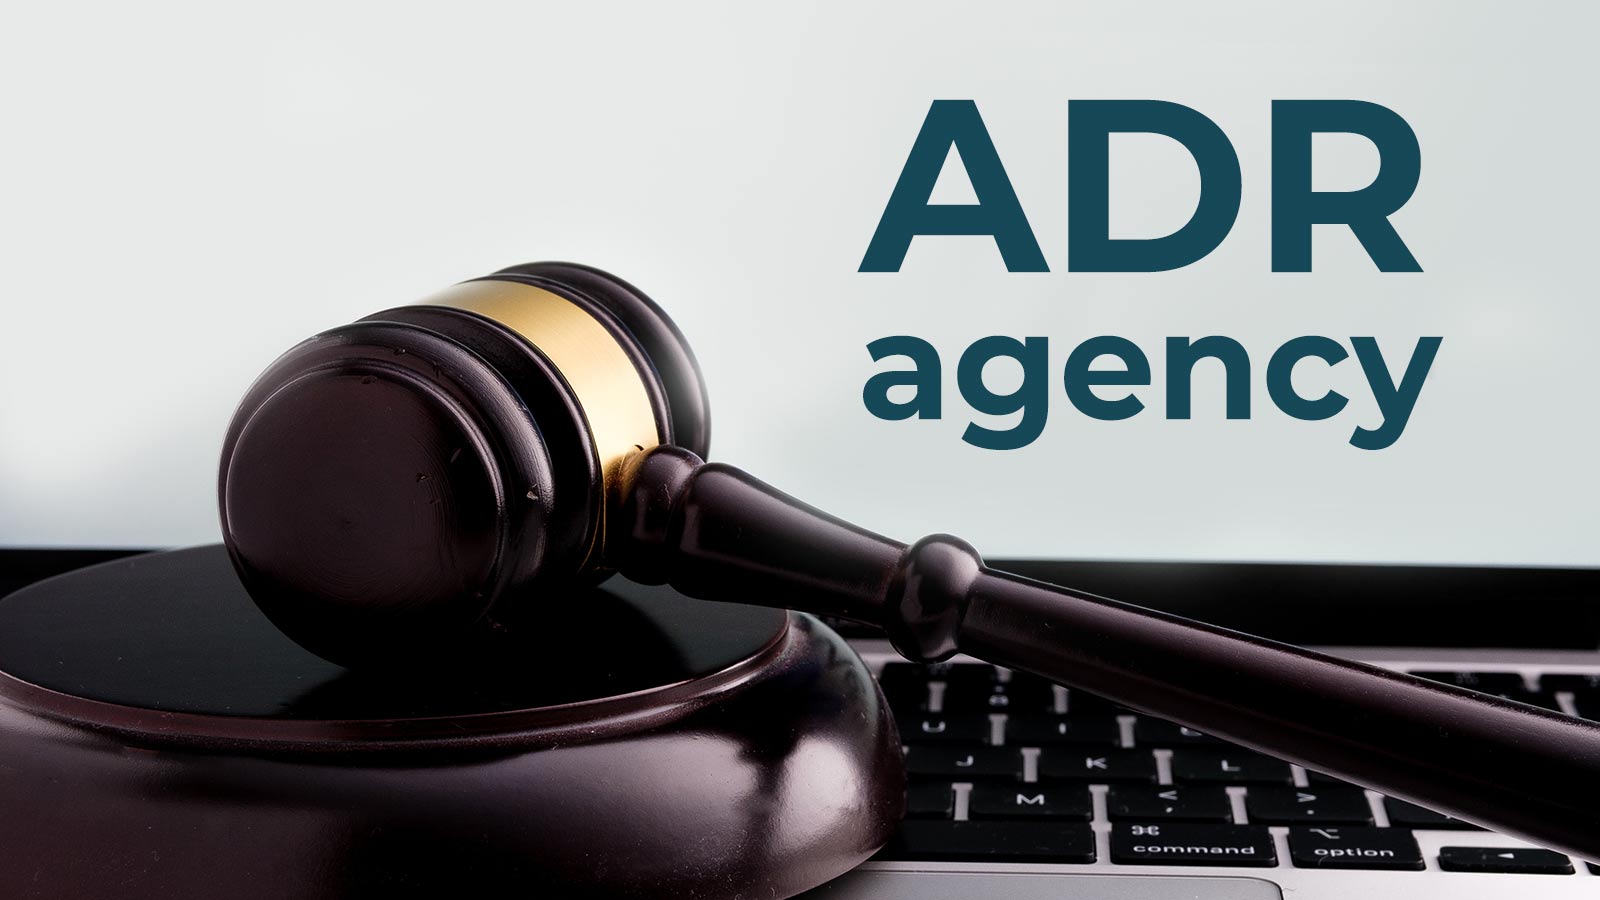 What is an ADR agency